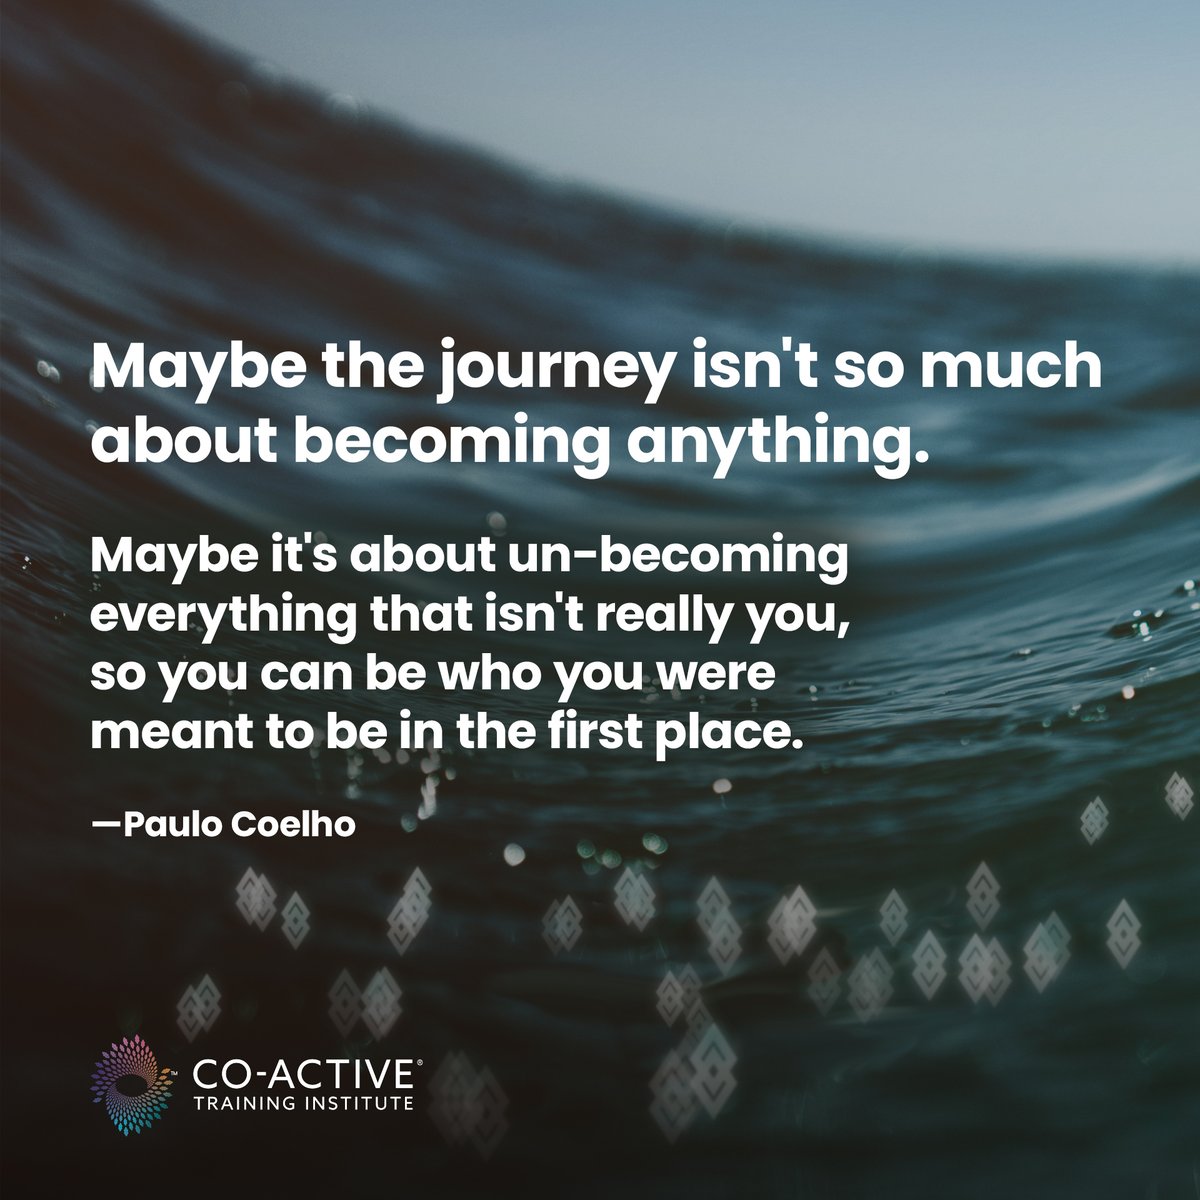 We love this quote!

And, incidentally, it's also a great description of the journey you take in the Co-Active Leadership Program ❤️

#coactive #coactiveleadershipprogram #findyourway #unbecoming

bit.ly/49GCizx